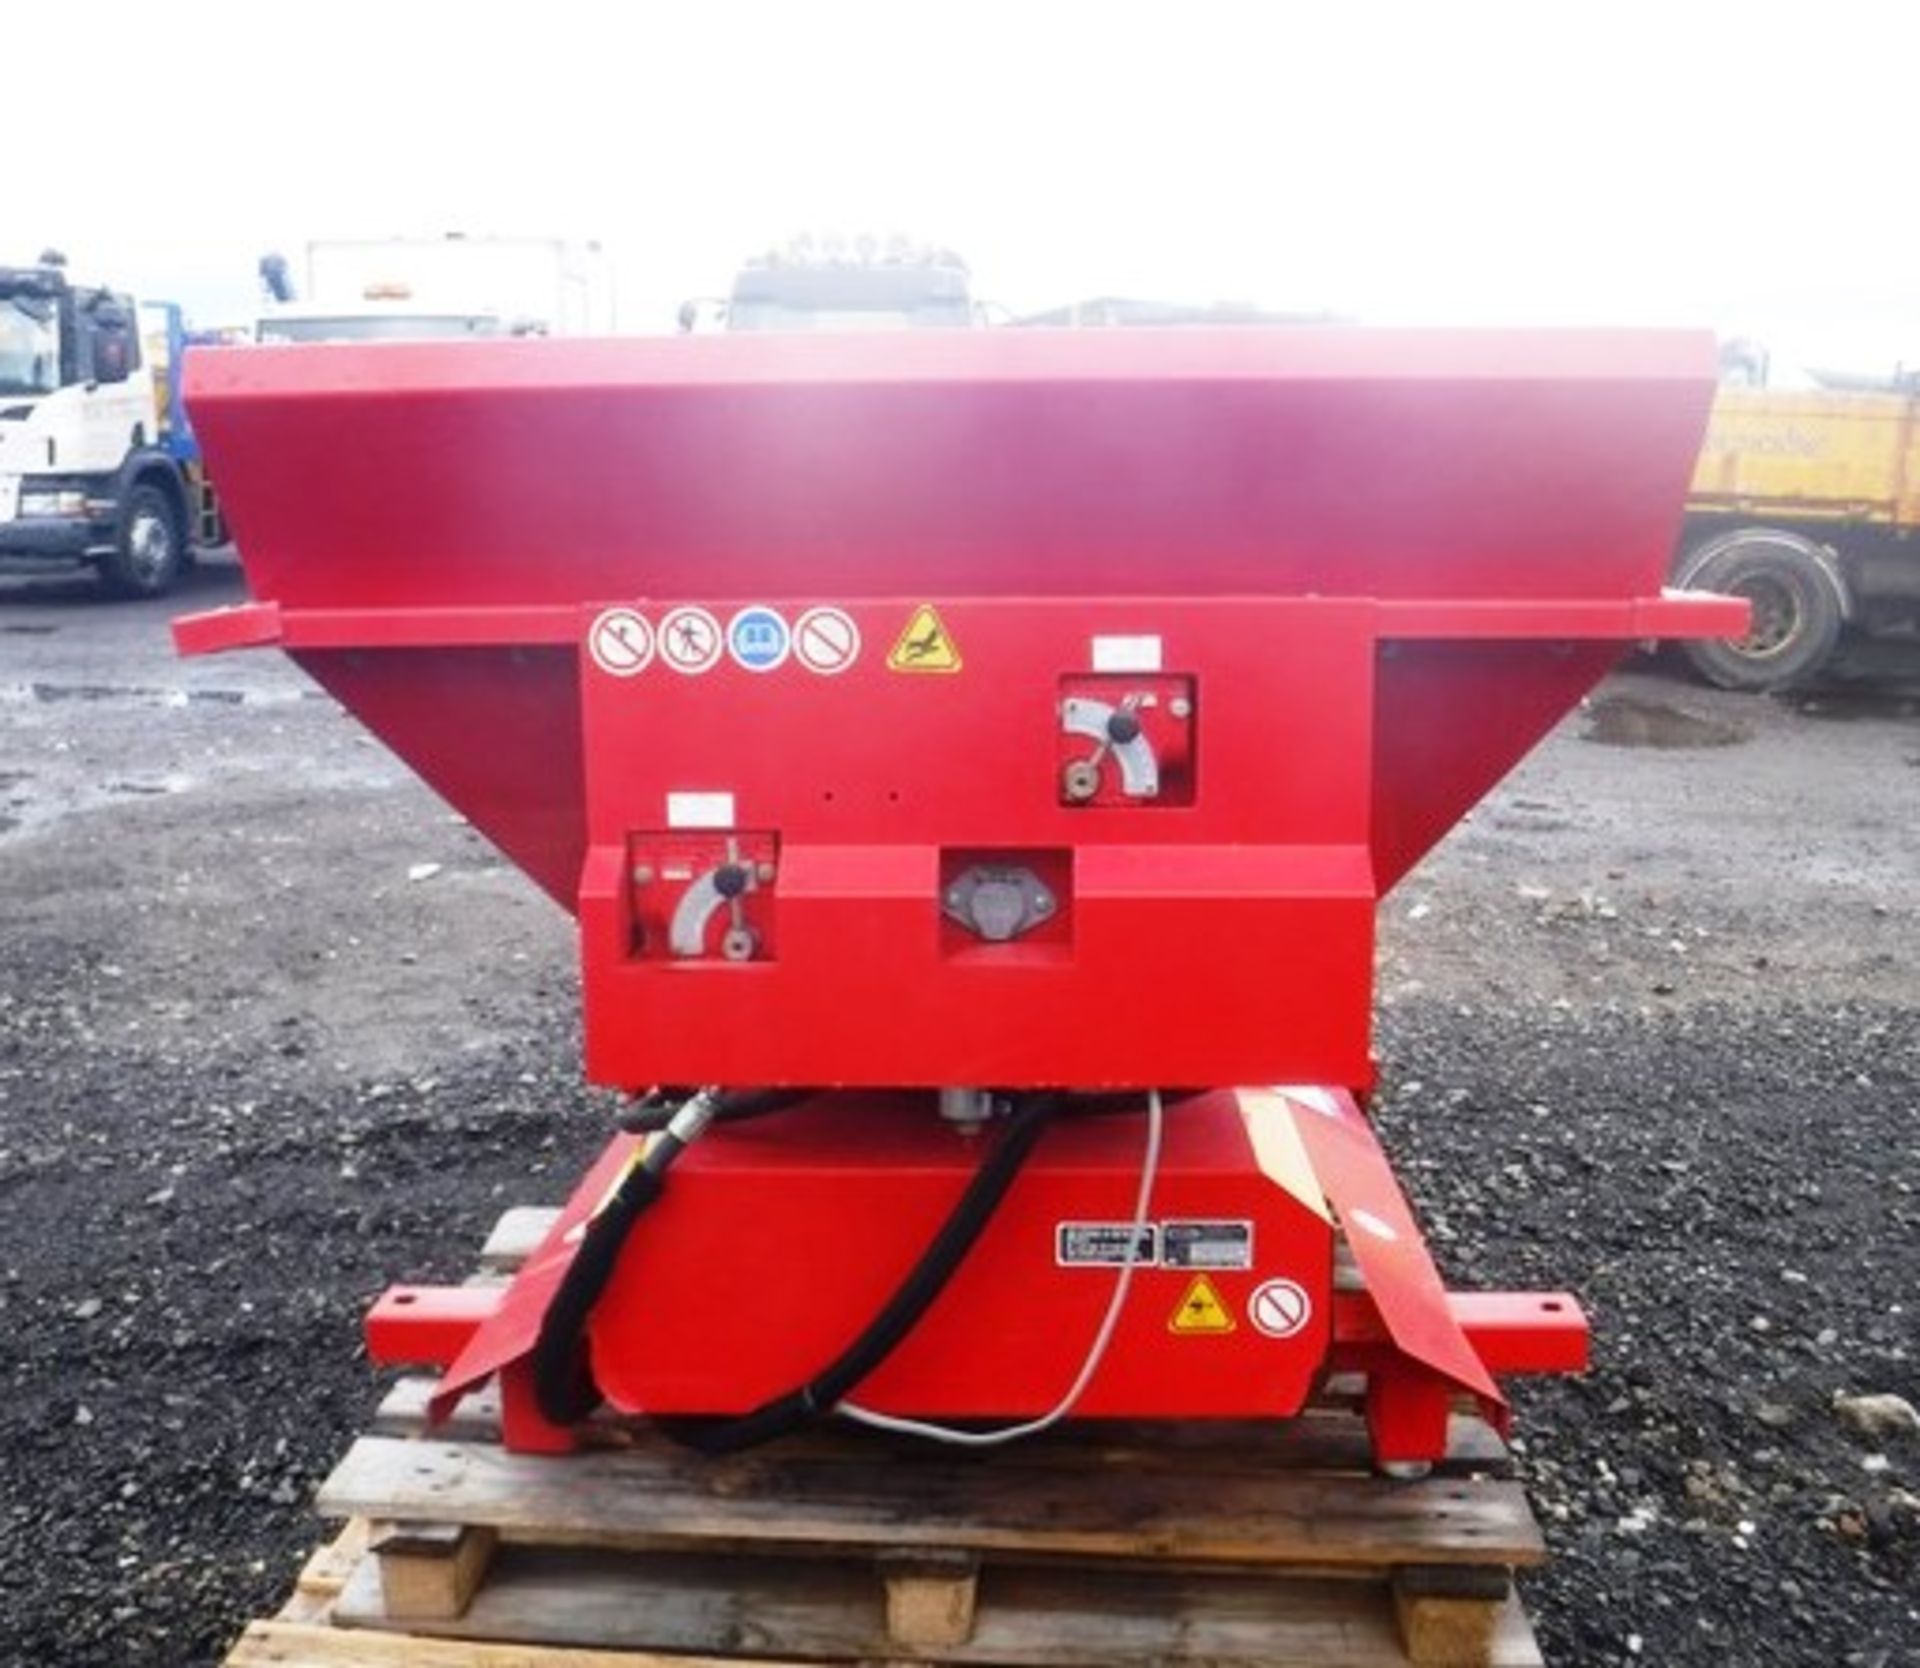 TYCROP PRO pass mounted spreader. S/N 20968100035786 - Image 4 of 6